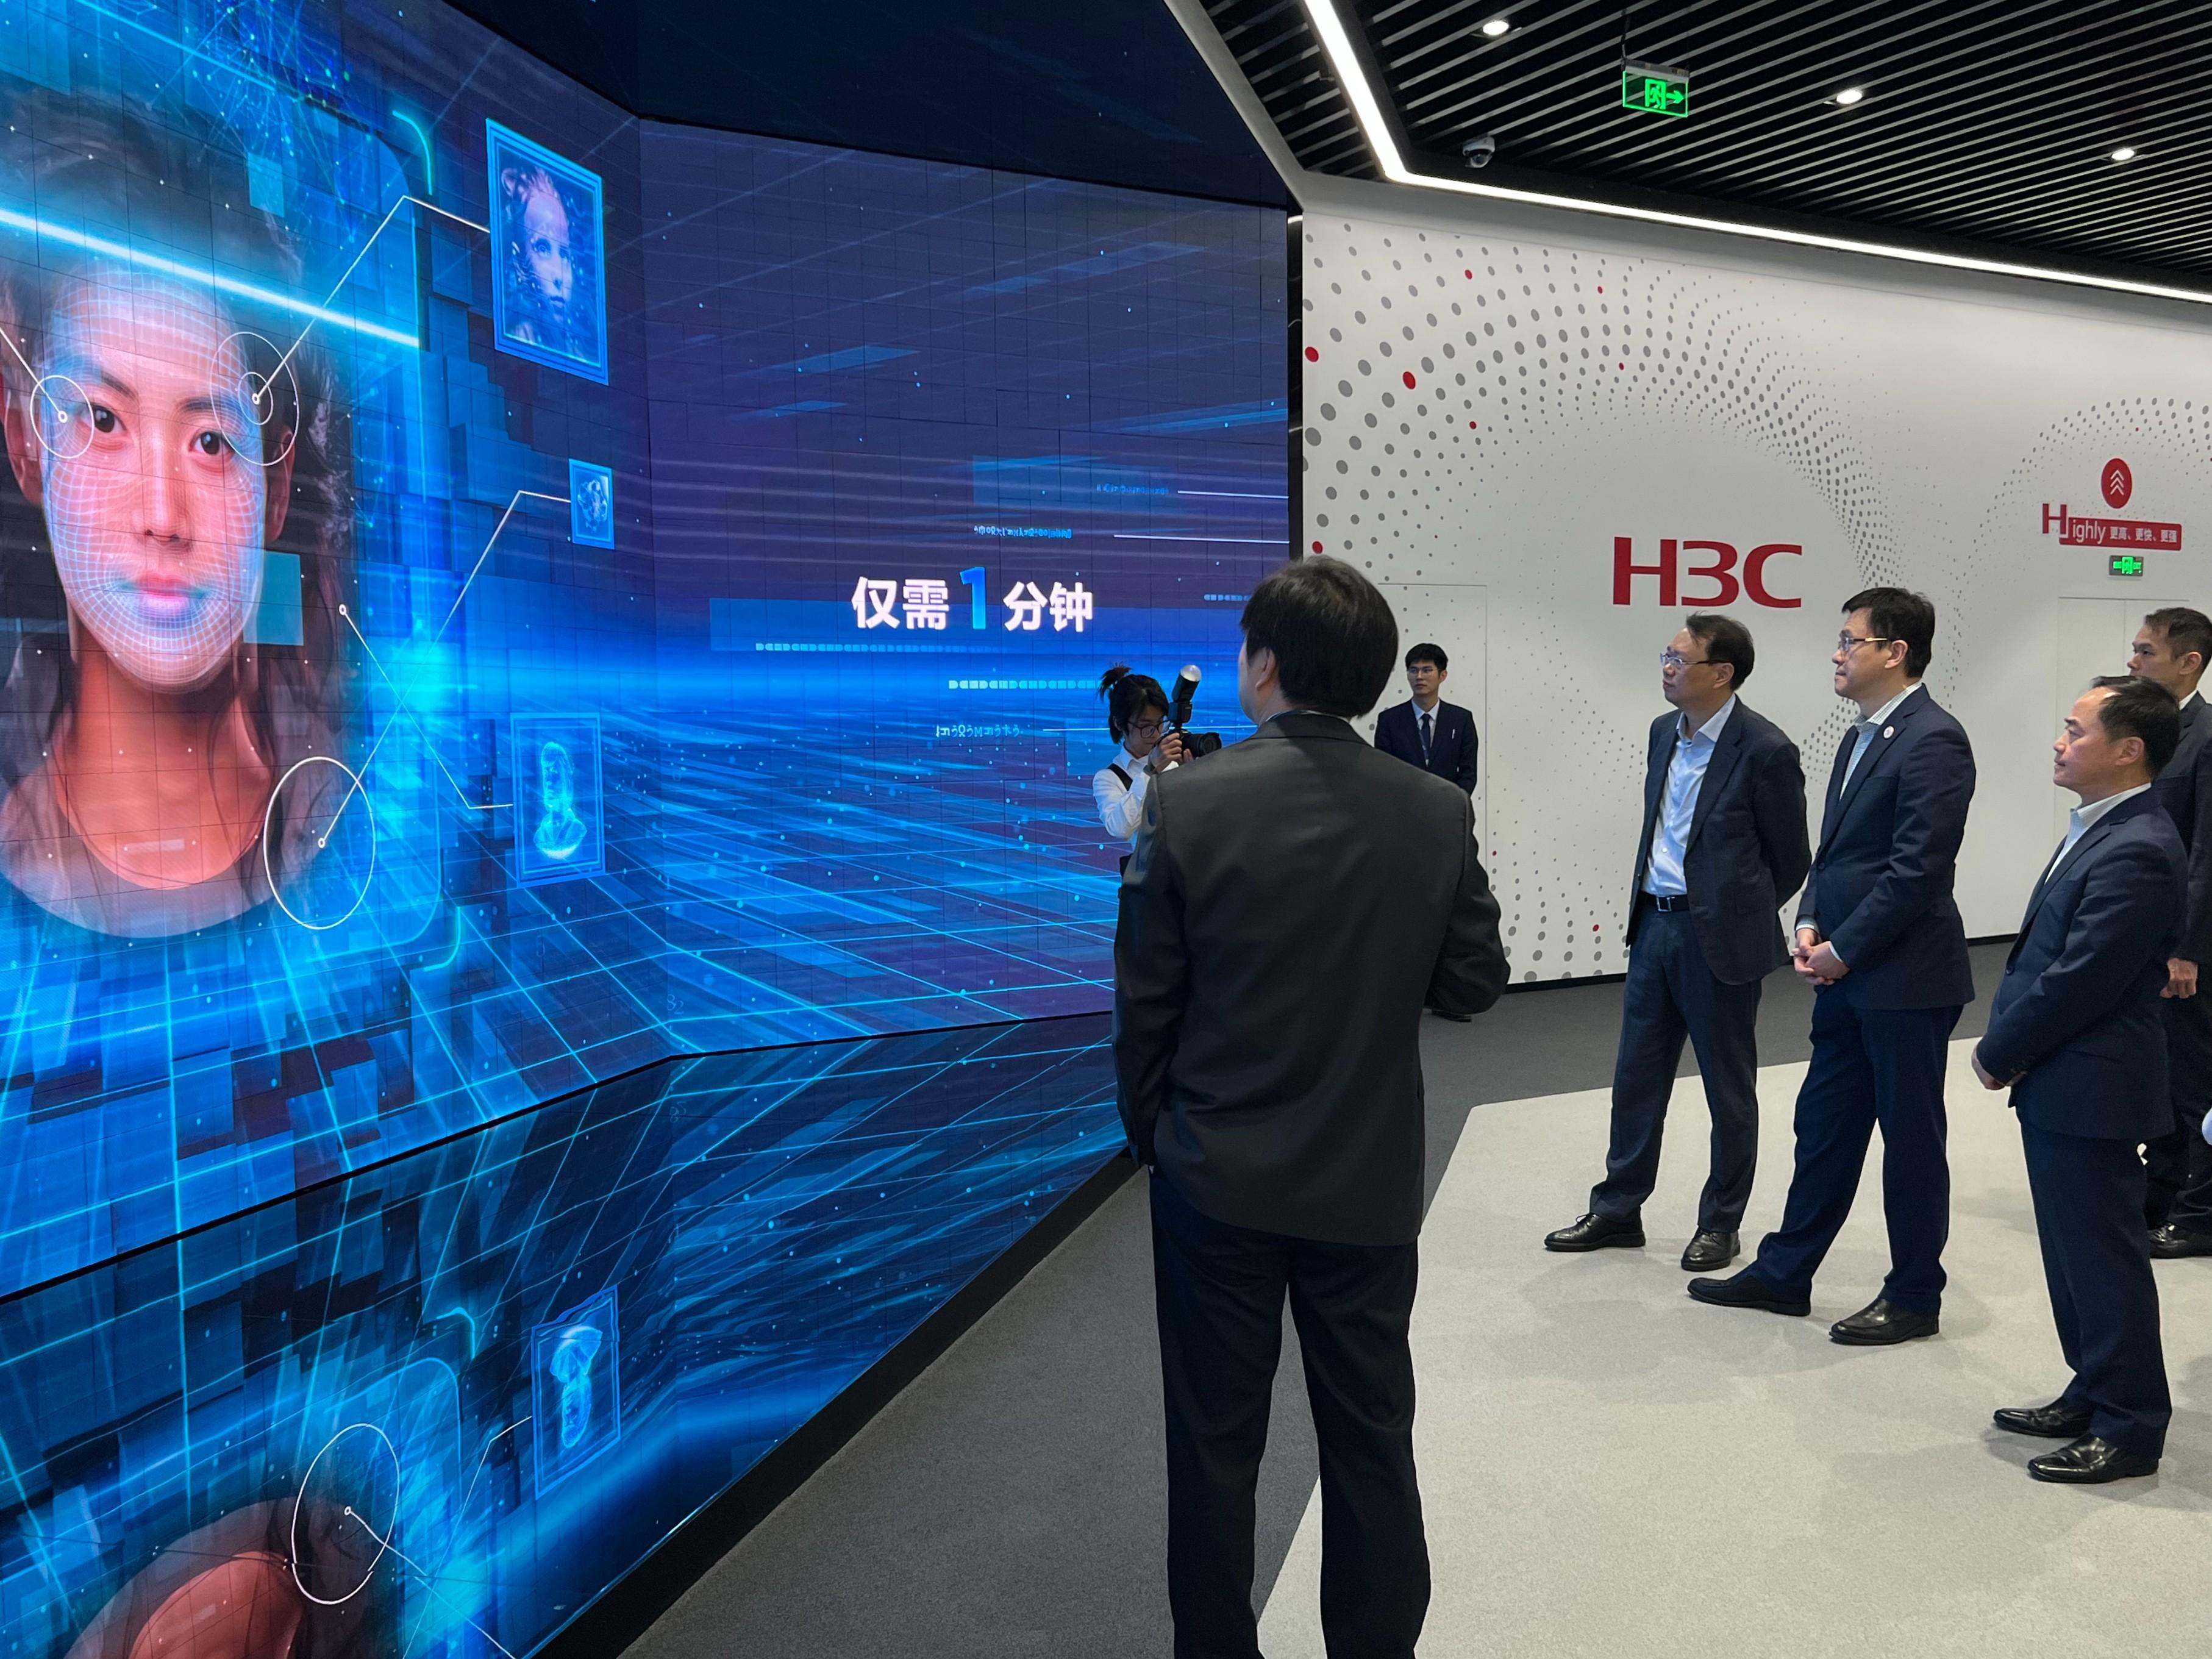 The Secretary for Innovation, Technology and Industry, Professor Sun Dong (third right), travels to Hangzhou and conducts a study on the Hangzhou Headquarters of H3C, a subsidiary of Unisplendour Corporation Limited, today (November 8) by visiting the headquarters' innovation experience centre. Next to Professor Sun is the Government Chief Information Officer, Mr Tony Wong (second right).